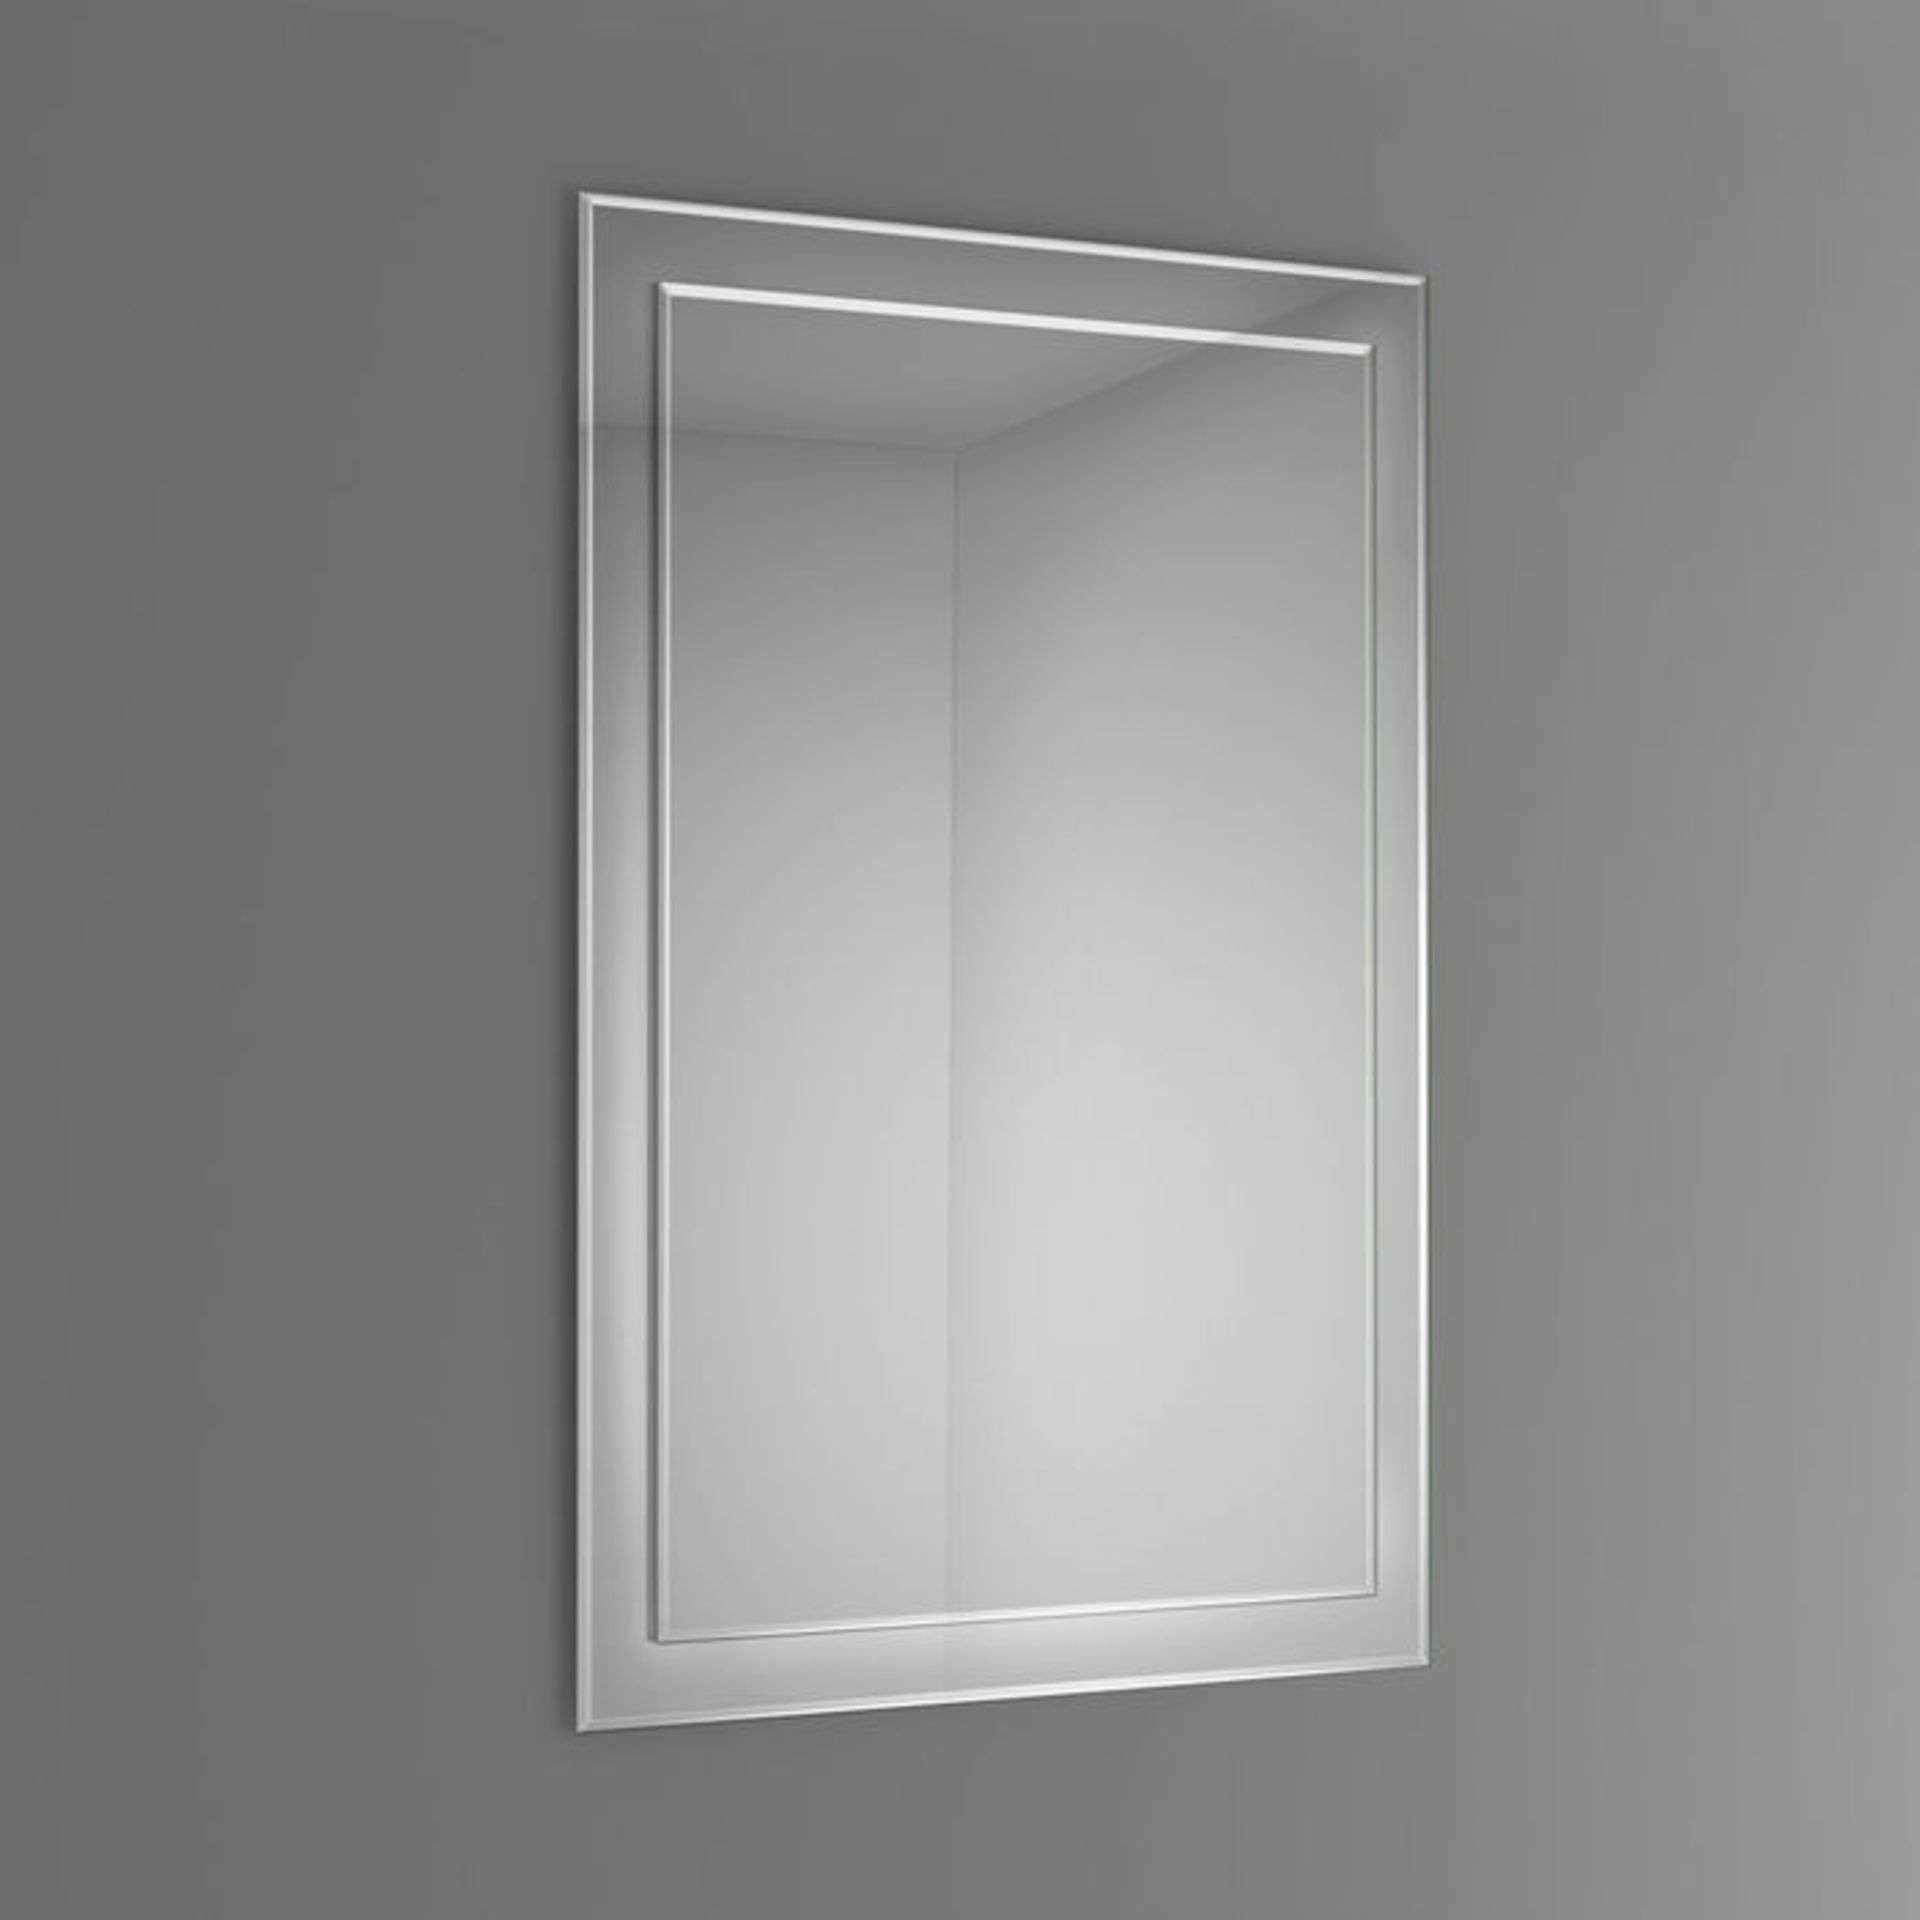 (O128) 500x700mm Bevel Mirror. RRP £69.99. Smooth beveled edge for additional safety and style - Image 3 of 3